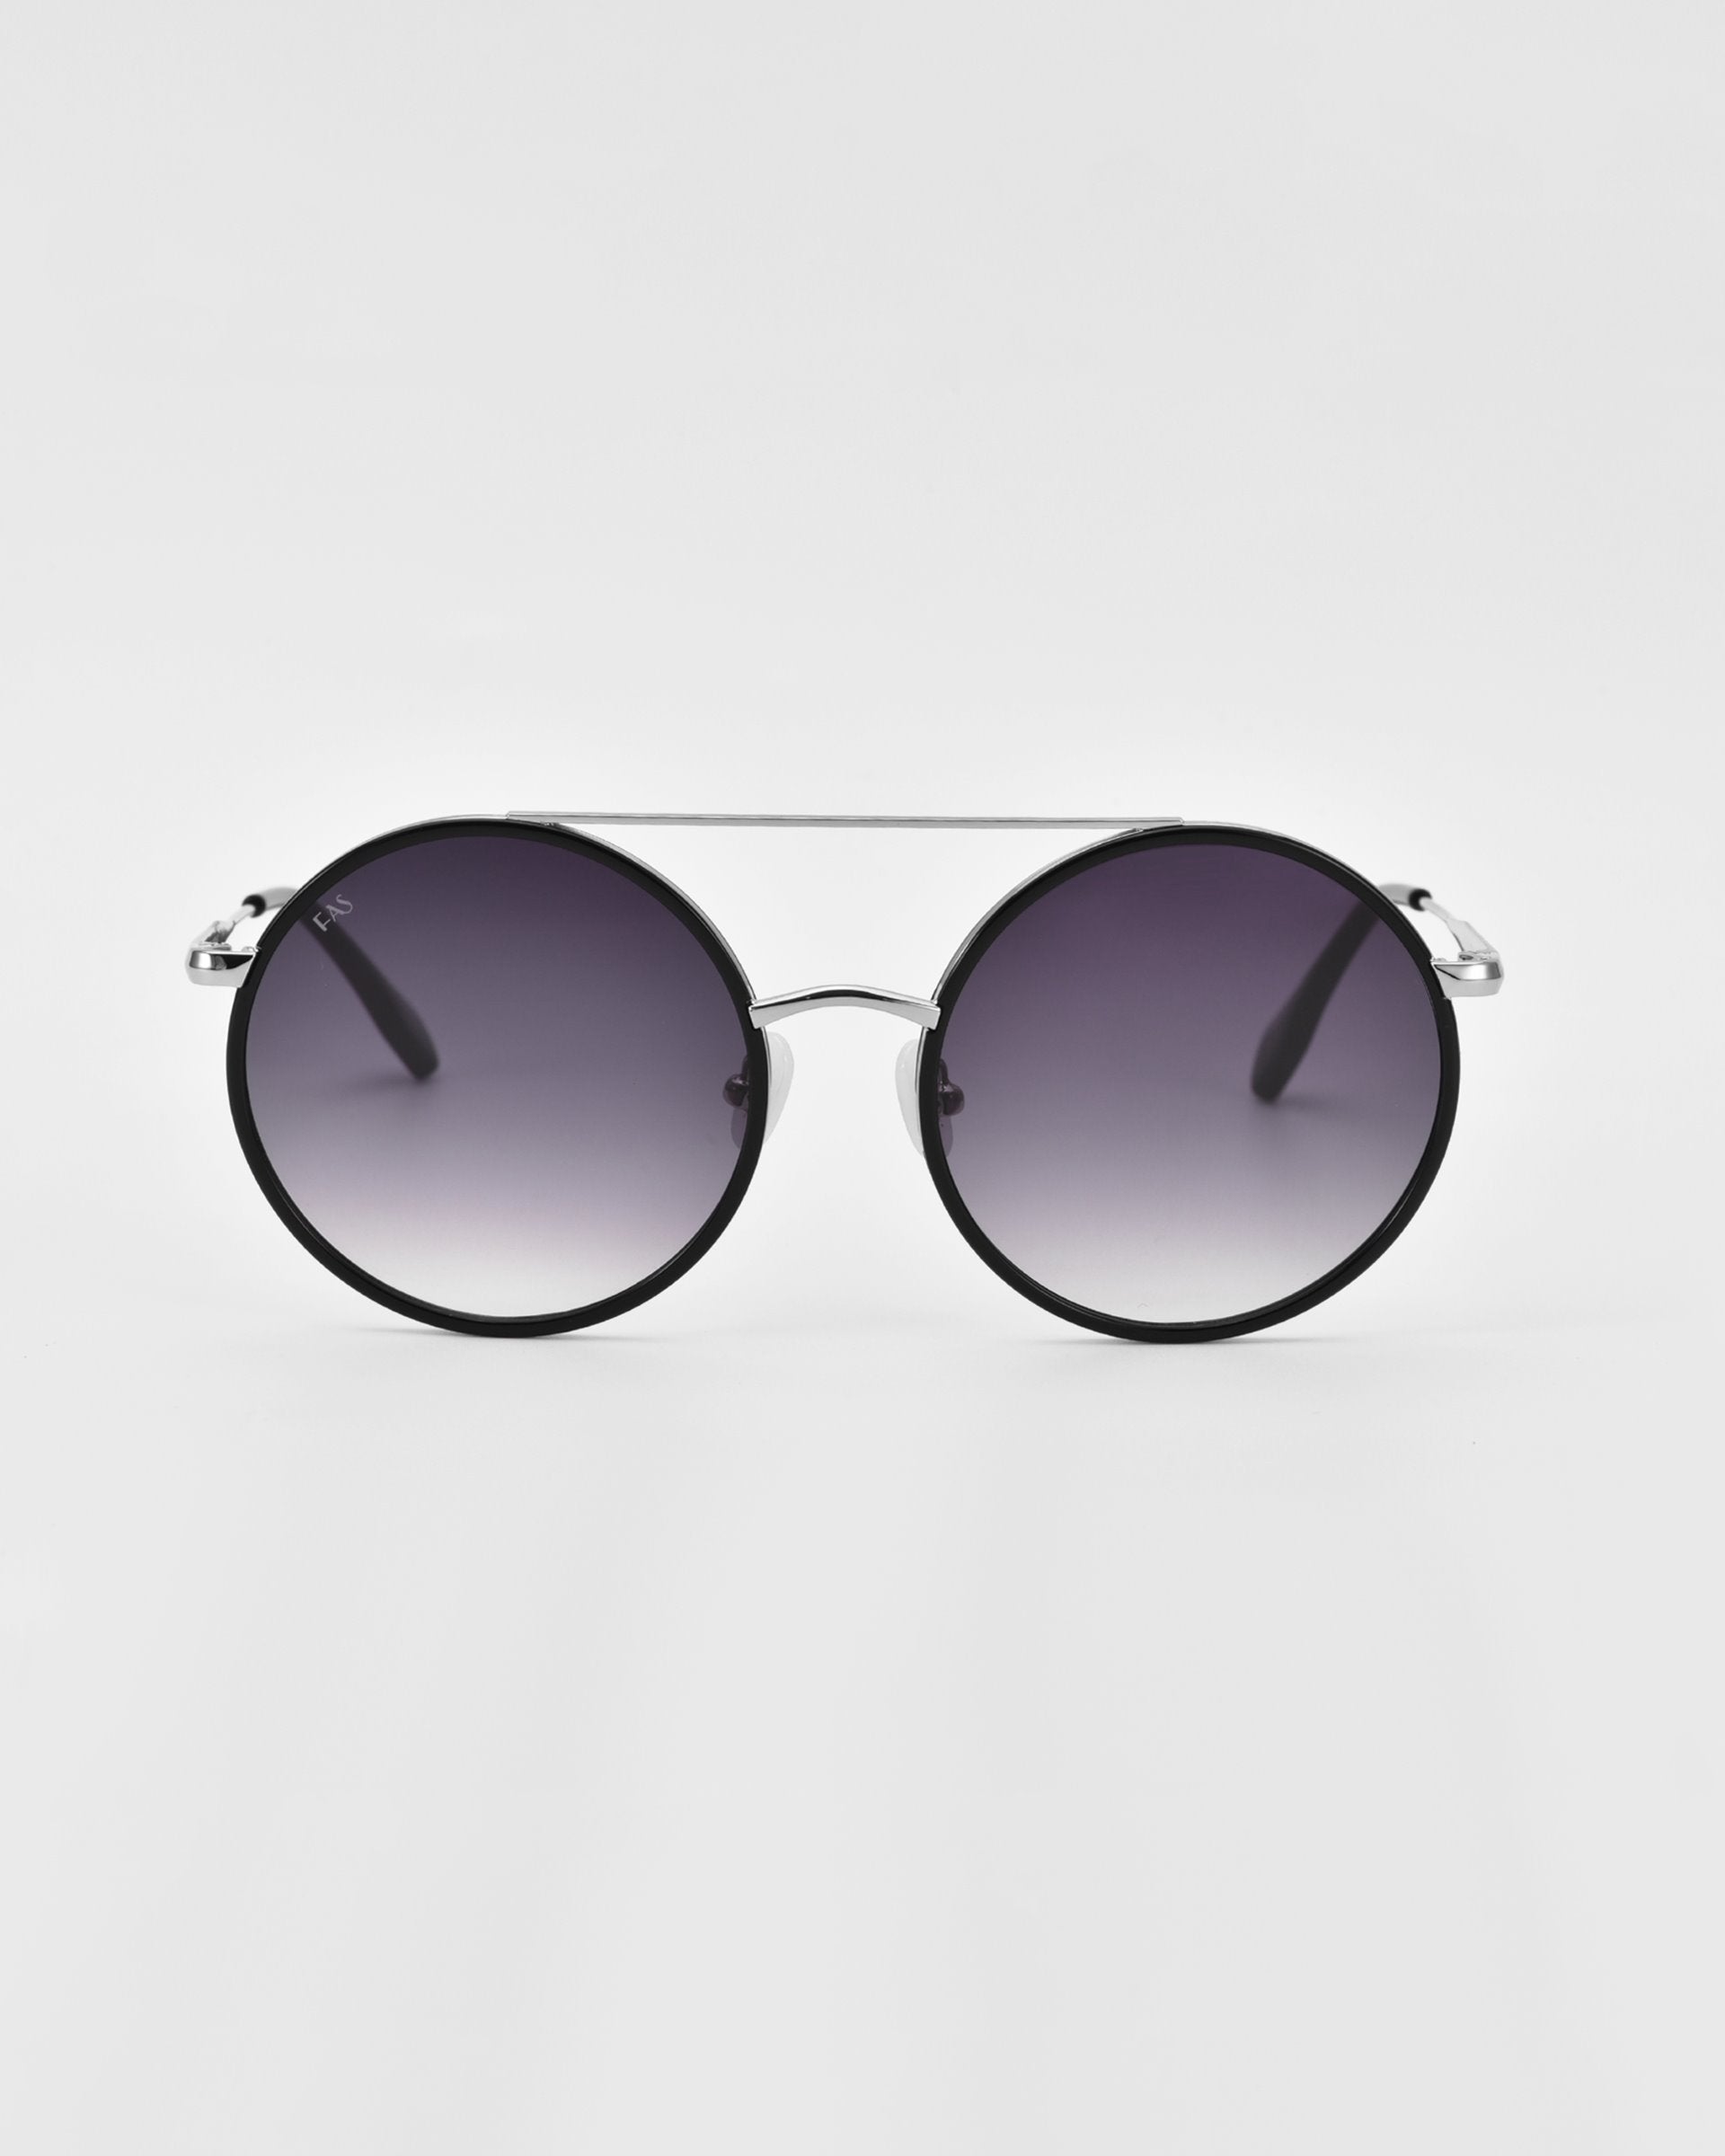 A pair of oversized round aviator sunglasses with gradient lenses, a black frame, and a thin silver bridge displayed against a plain white background. The design is minimalistic and modern, with sleek gold and silver-tone metal accents for a stylish appearance. The product is called Orb by For Art&#39;s Sake®.